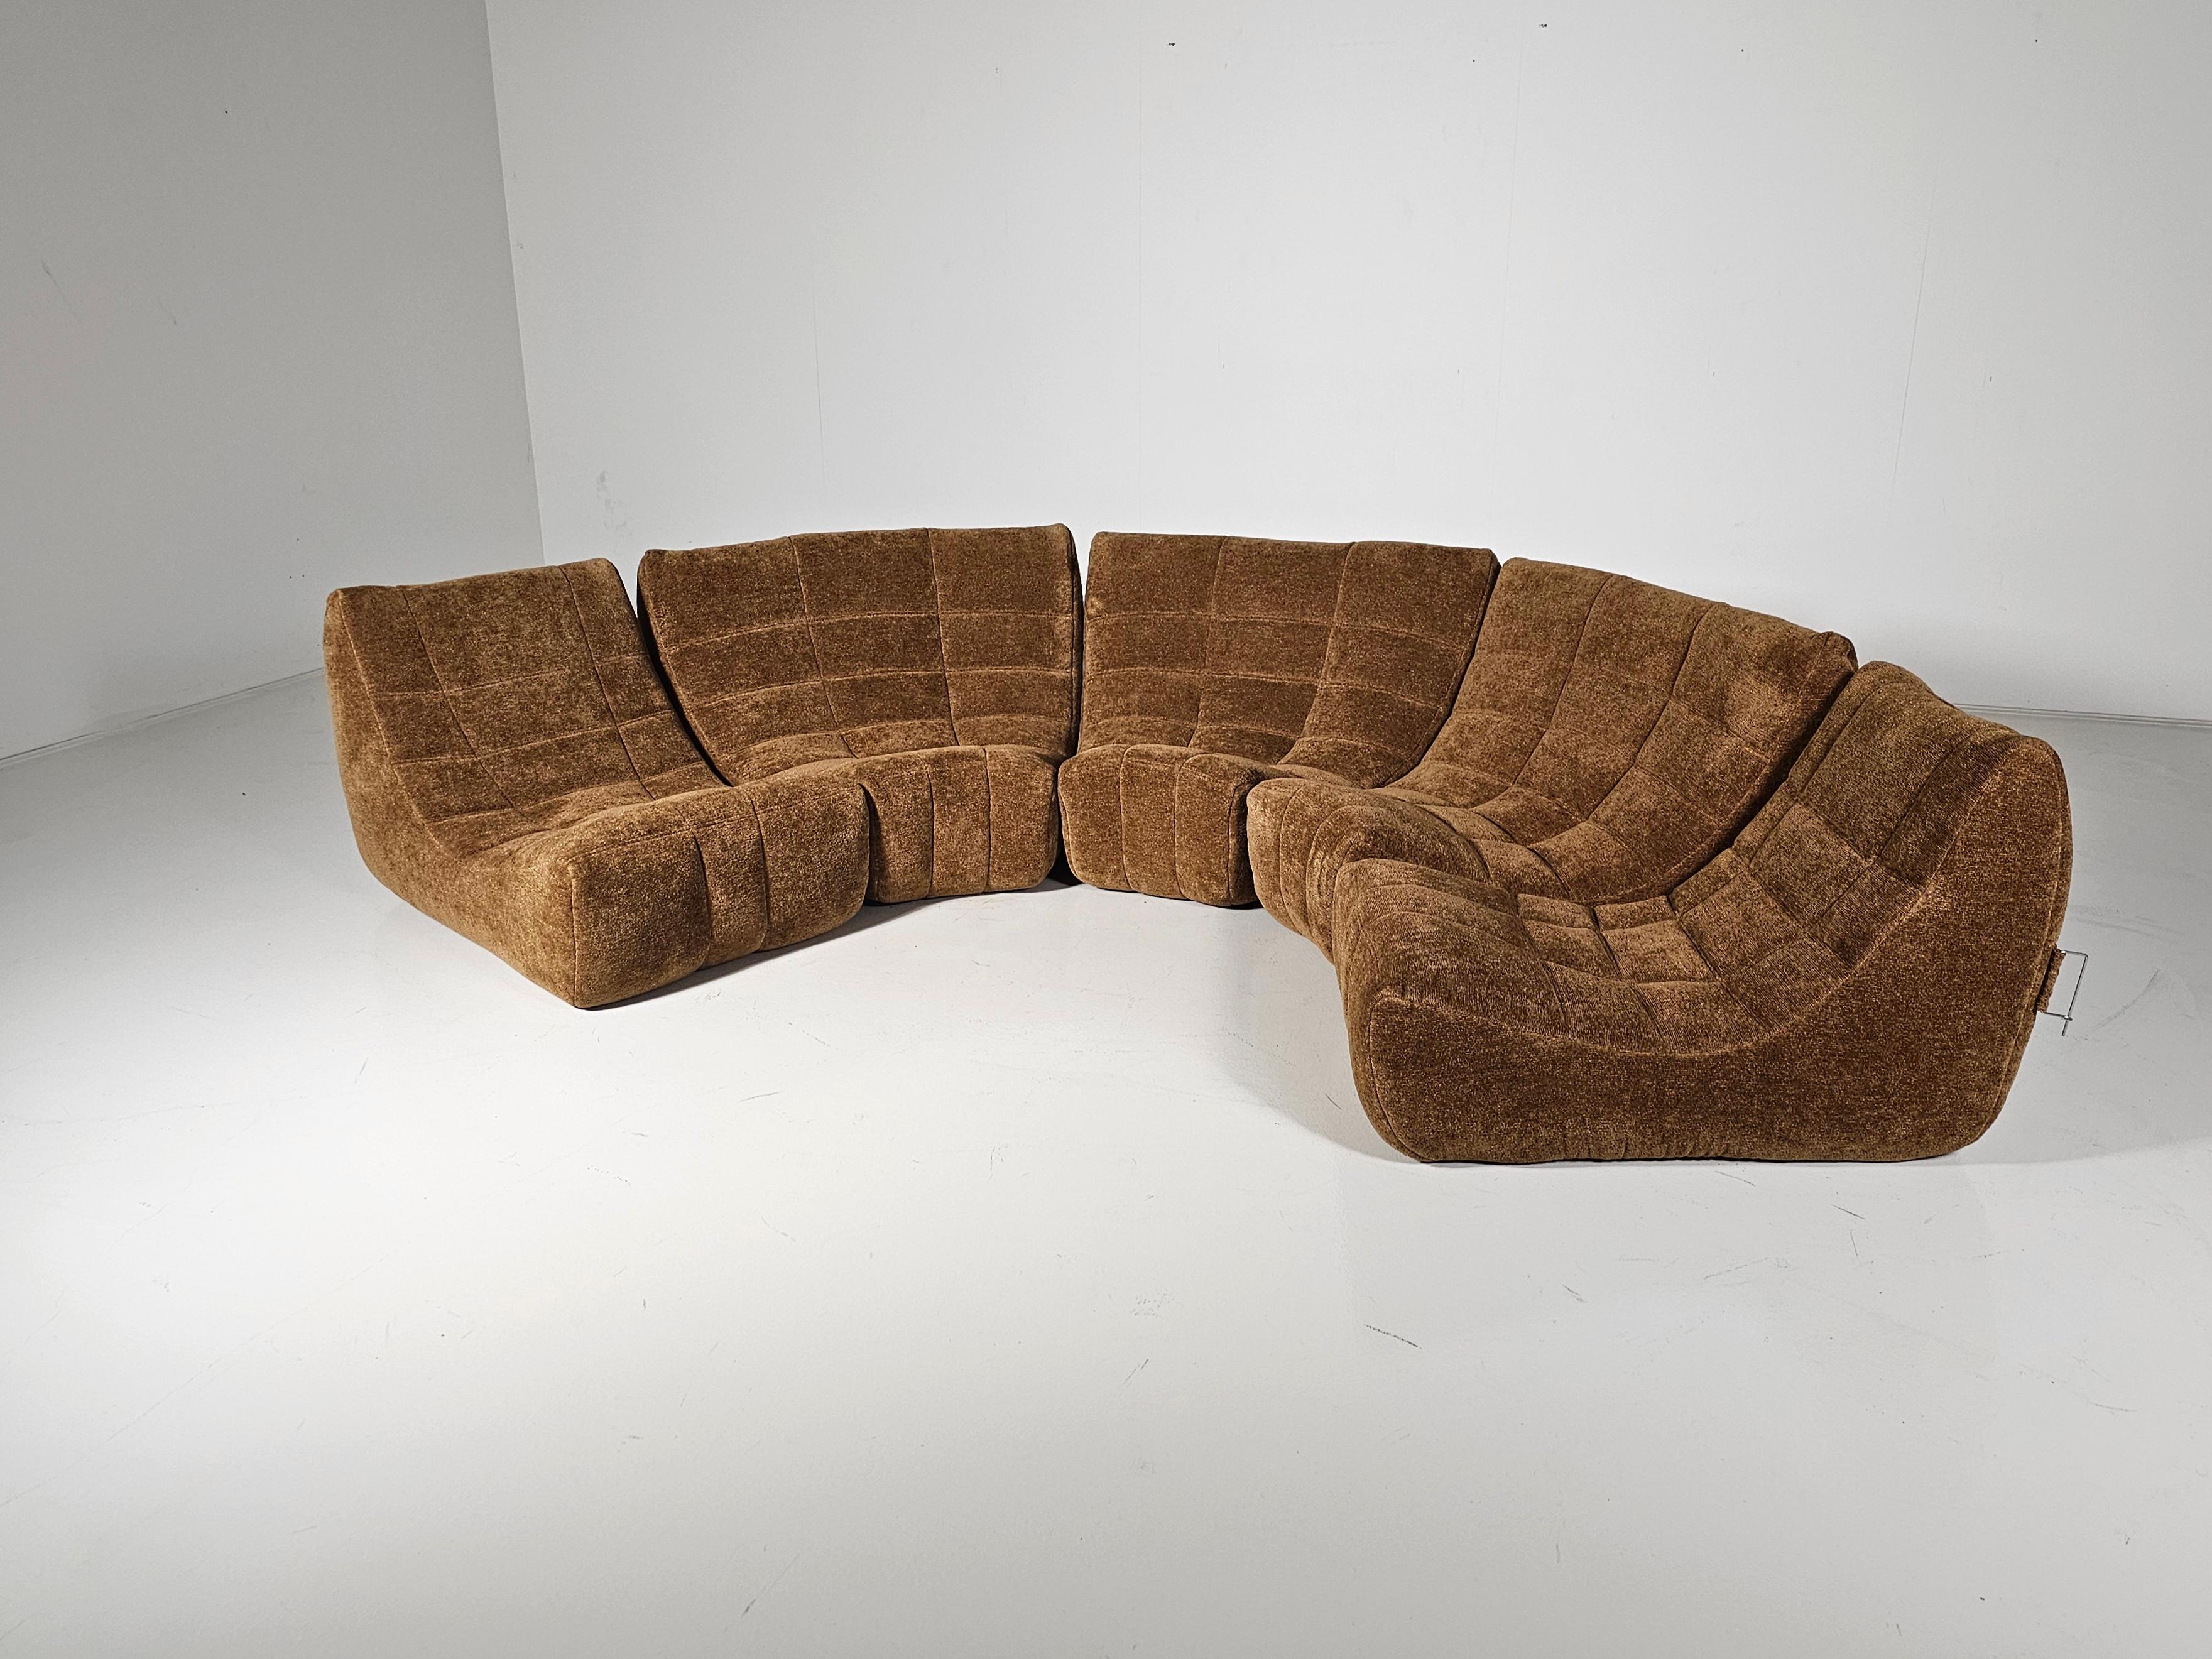 The Gilda sofa, composed of comfortable curved modules, is a rare sibling to Michel Ducaroy’s famous Toga sofa. A student of sculpture at École Nationale Supérieure des Beaux-Arts in Lyon, Ducaroy was primarily concerned with form and shape.